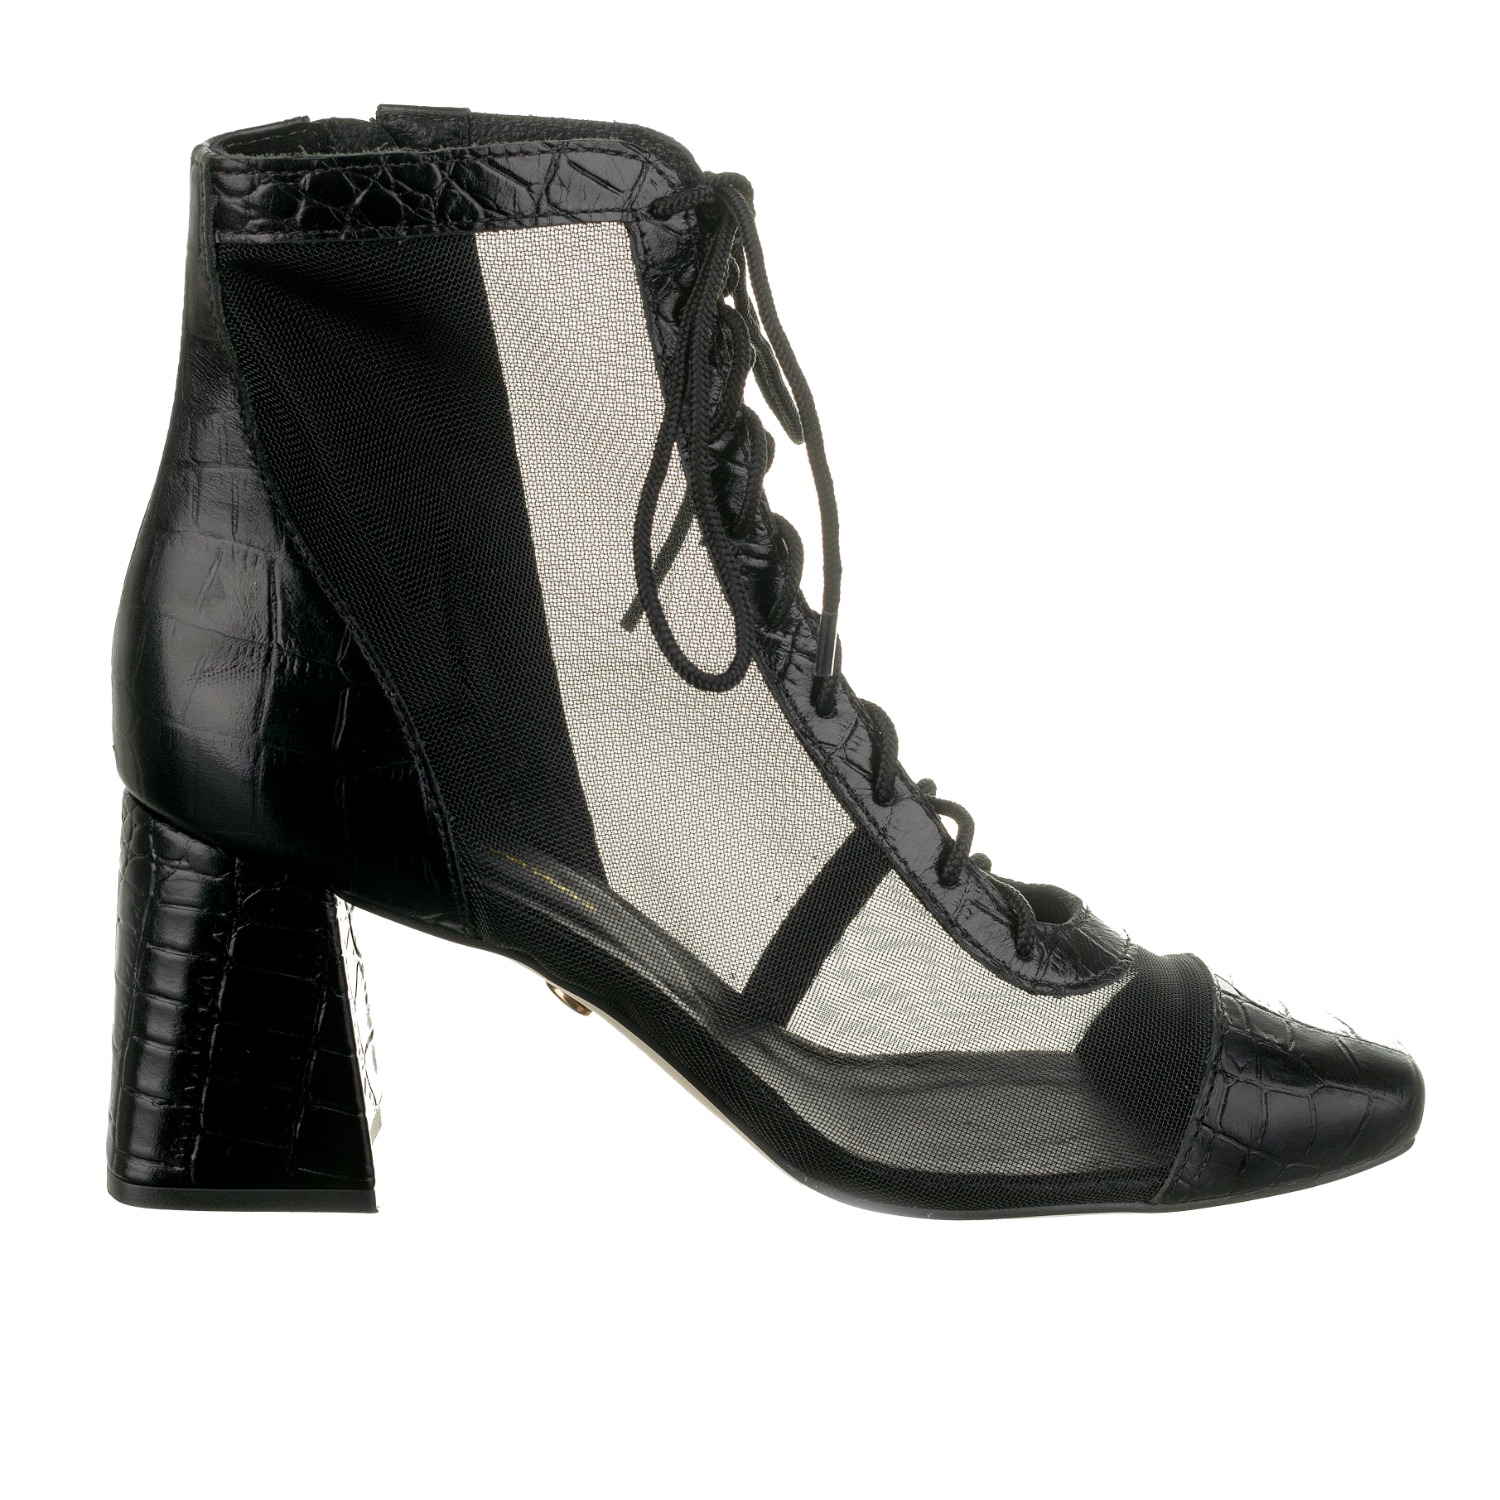 Black Patent Leather Heeled Ankle Boots, Mas Laus